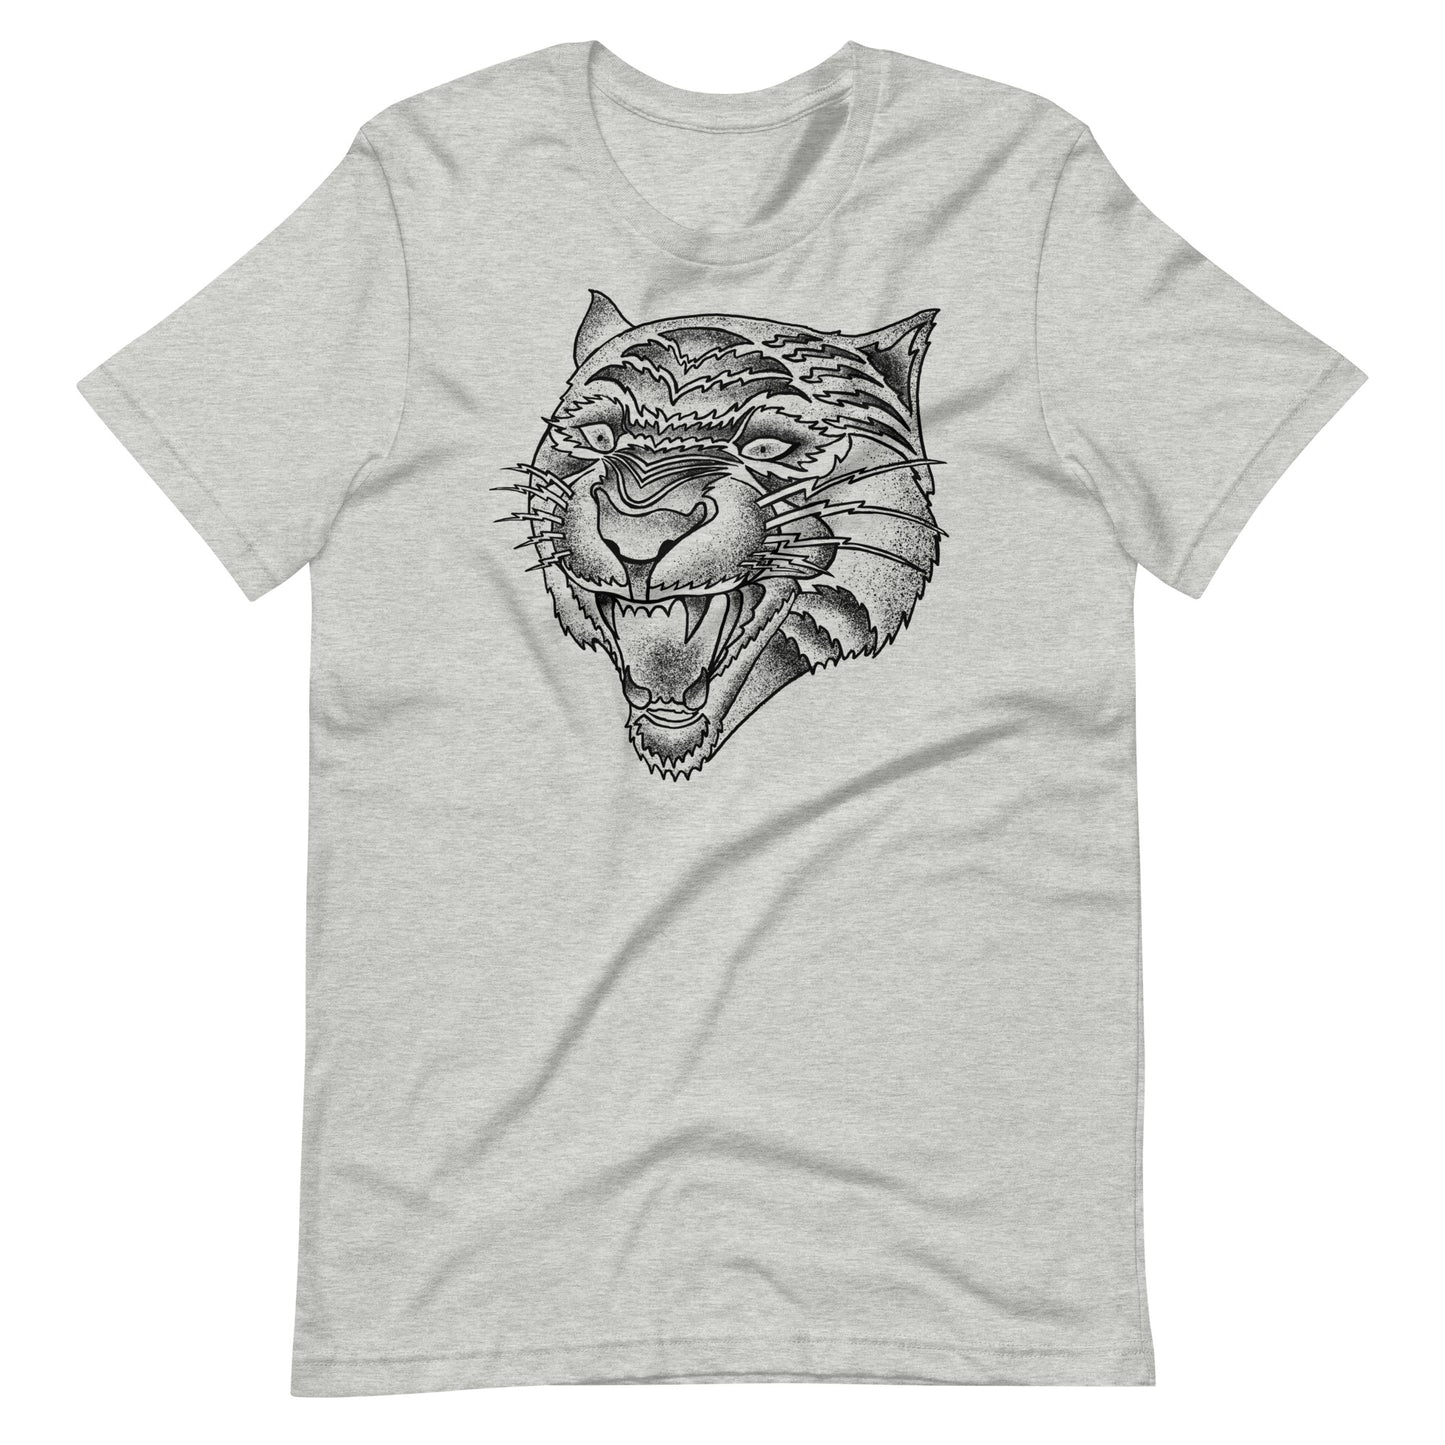 Panther Black - Men's t-shirt - Athletic Heather Front